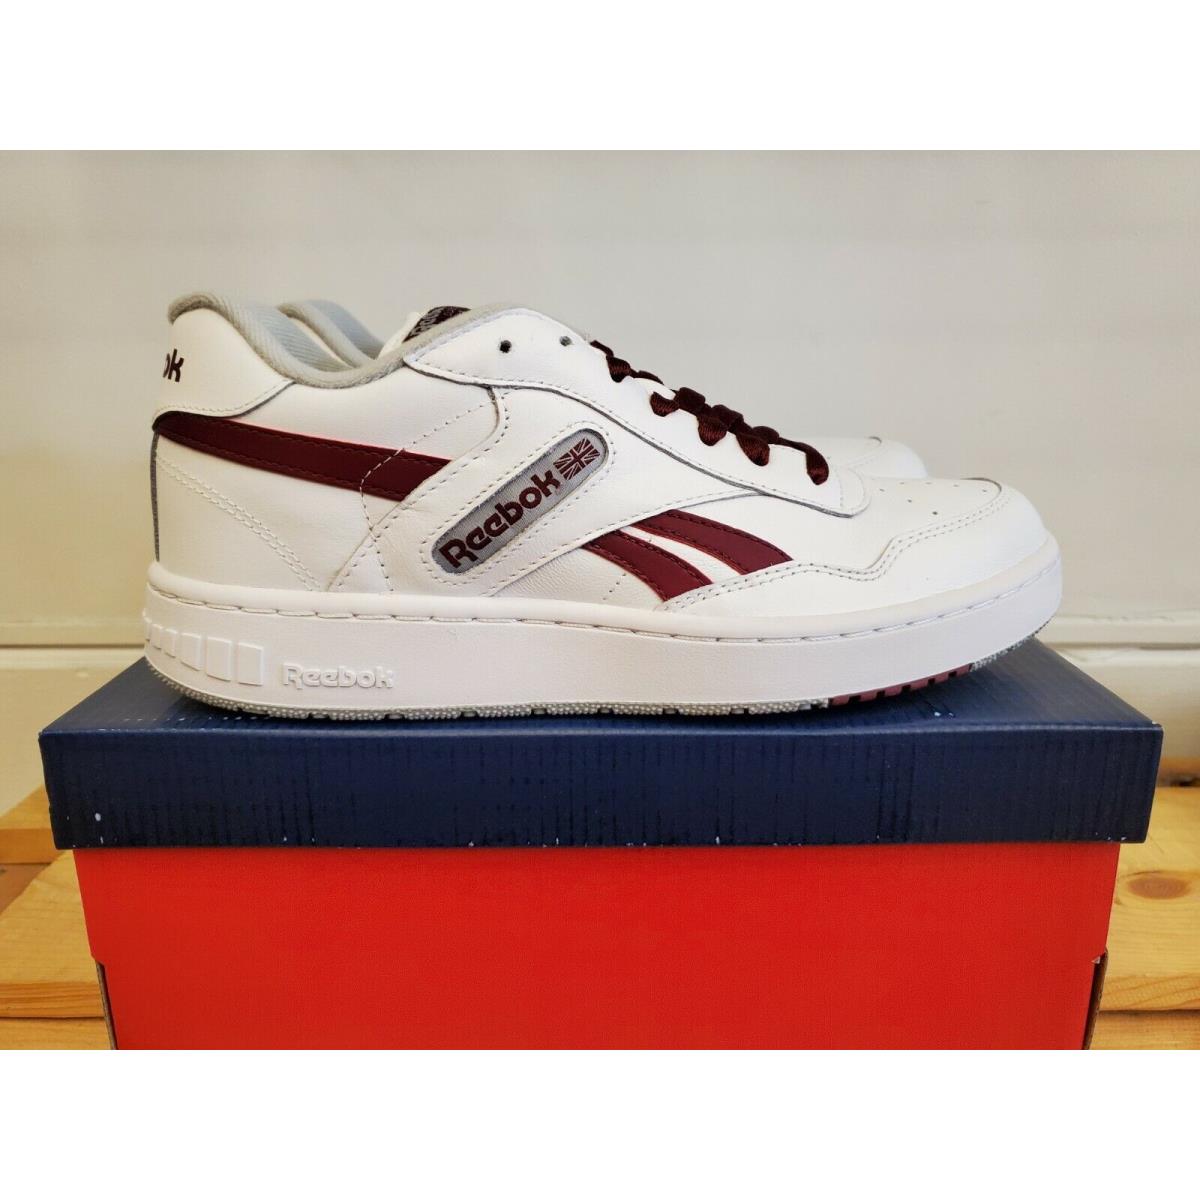 Reebok Classic Basketball White Leather Lifestyle Sneaker Shoes For Men